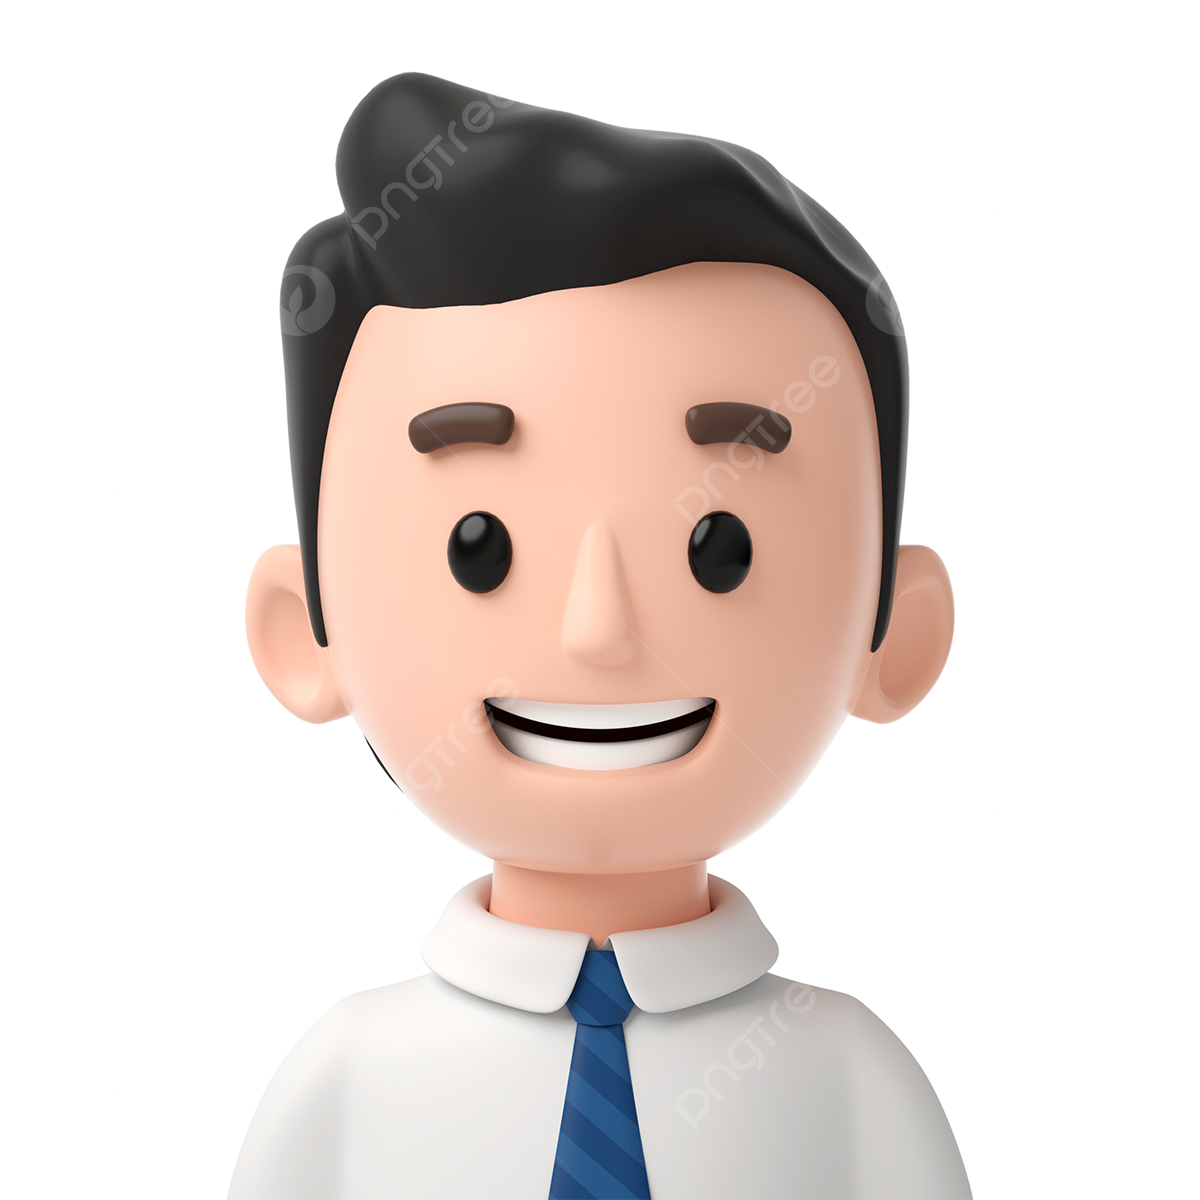 pngtree-business-man-avatar-png-image_8855195